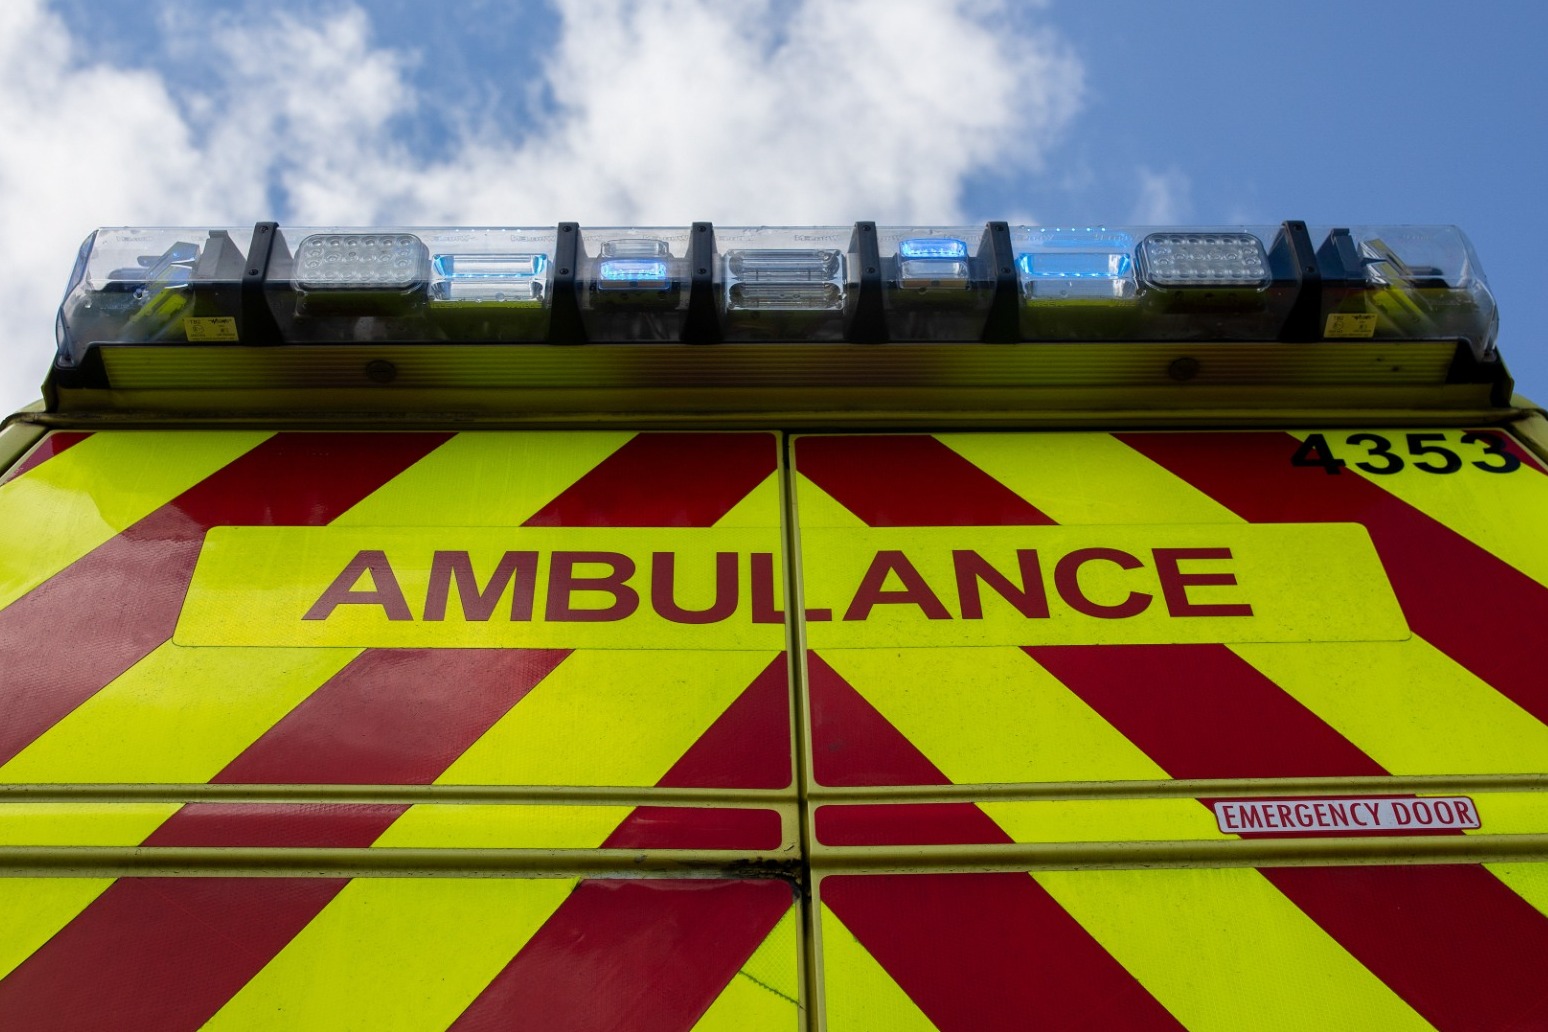 Ambulance service accused of covering up errors when patients died apologises 